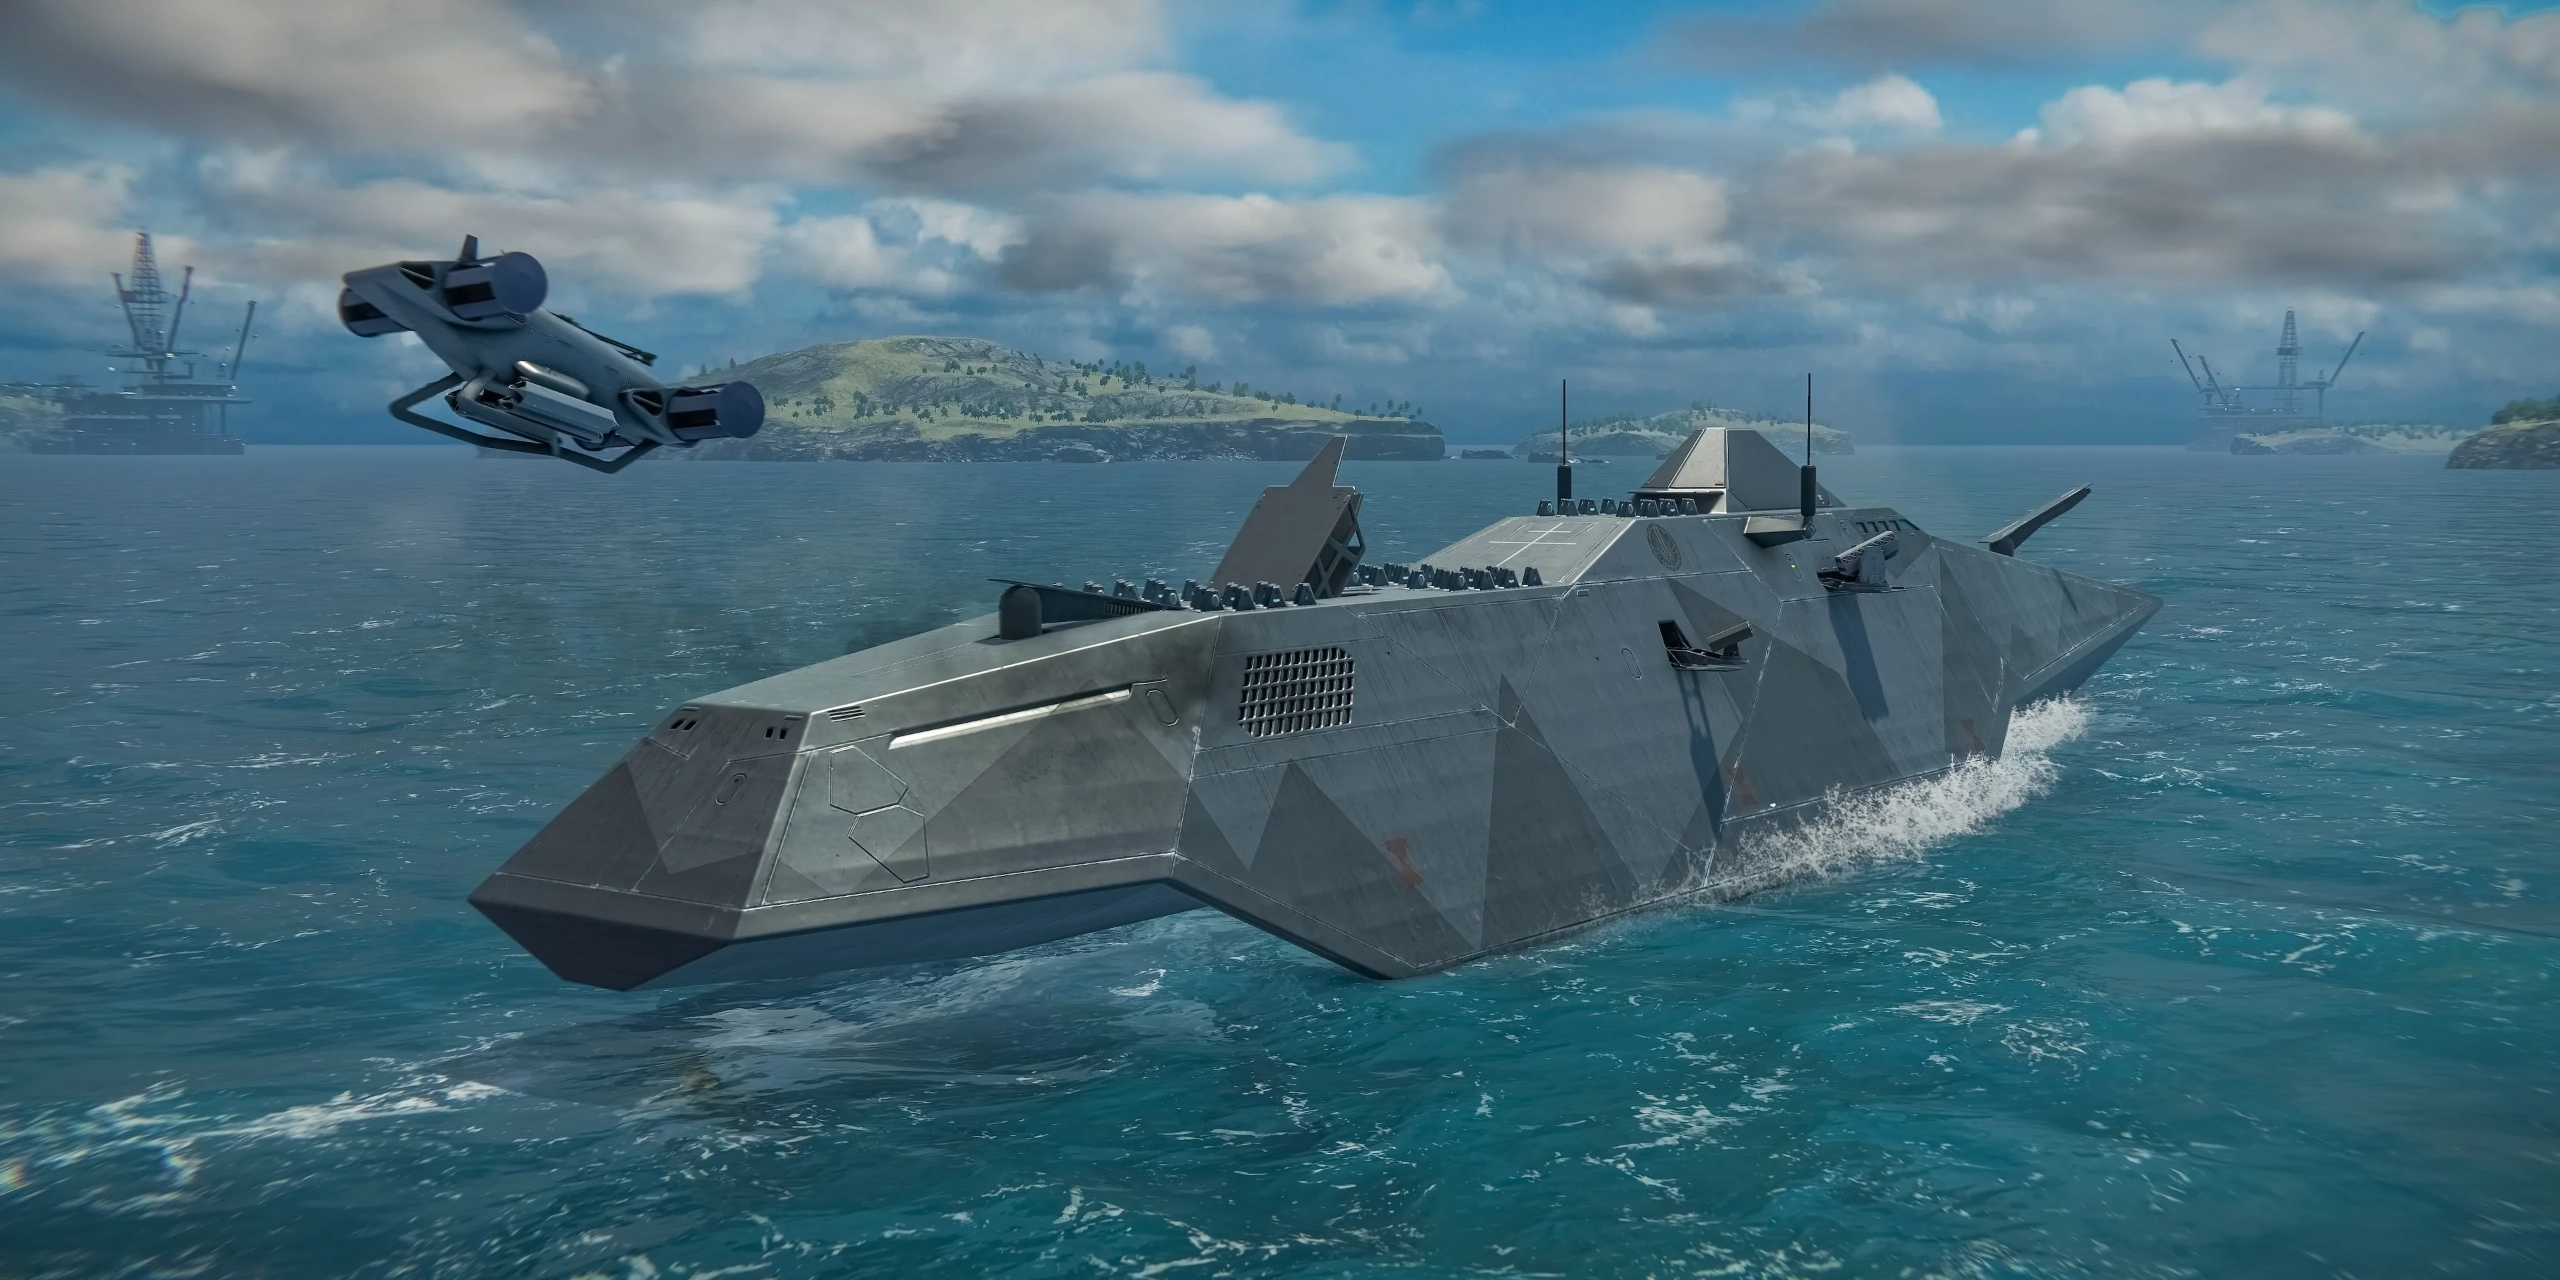 A Pan Spatial REDRUM hydrofoil destroyer picking up speed in transition to foilborne sailing. It has just launched a Pan Spatial Cyclone cyclorotor UCAV, which flies in the foreground.